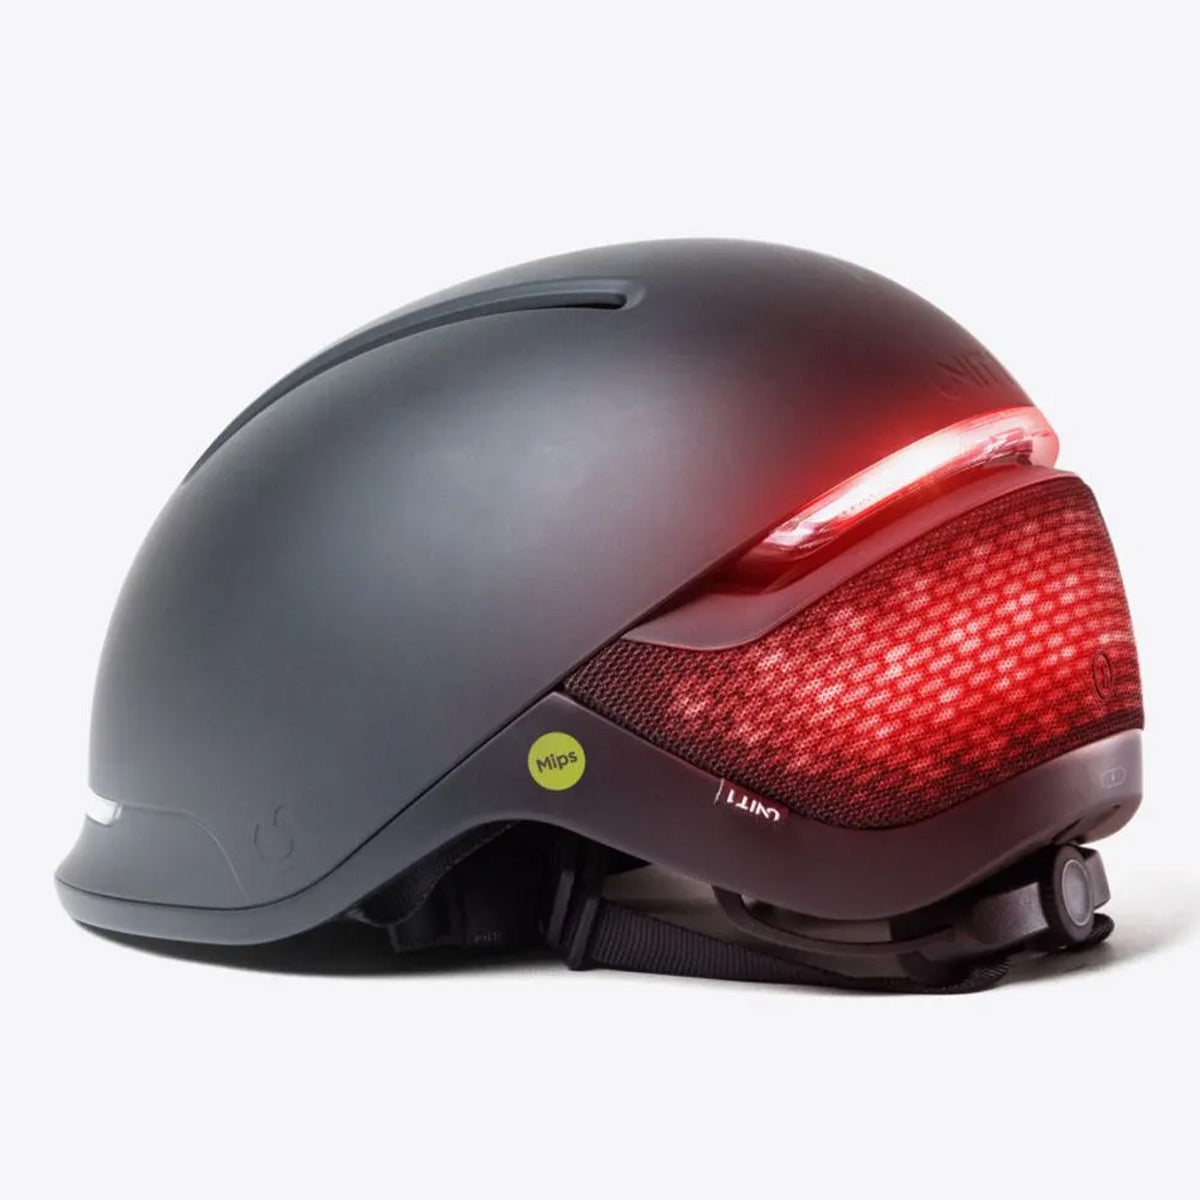 Unit 1 FARO Smart Helmet with Mips Impact Safety System & Wireless Navigation Remote for Directional Signaling - Large (Blackbird)